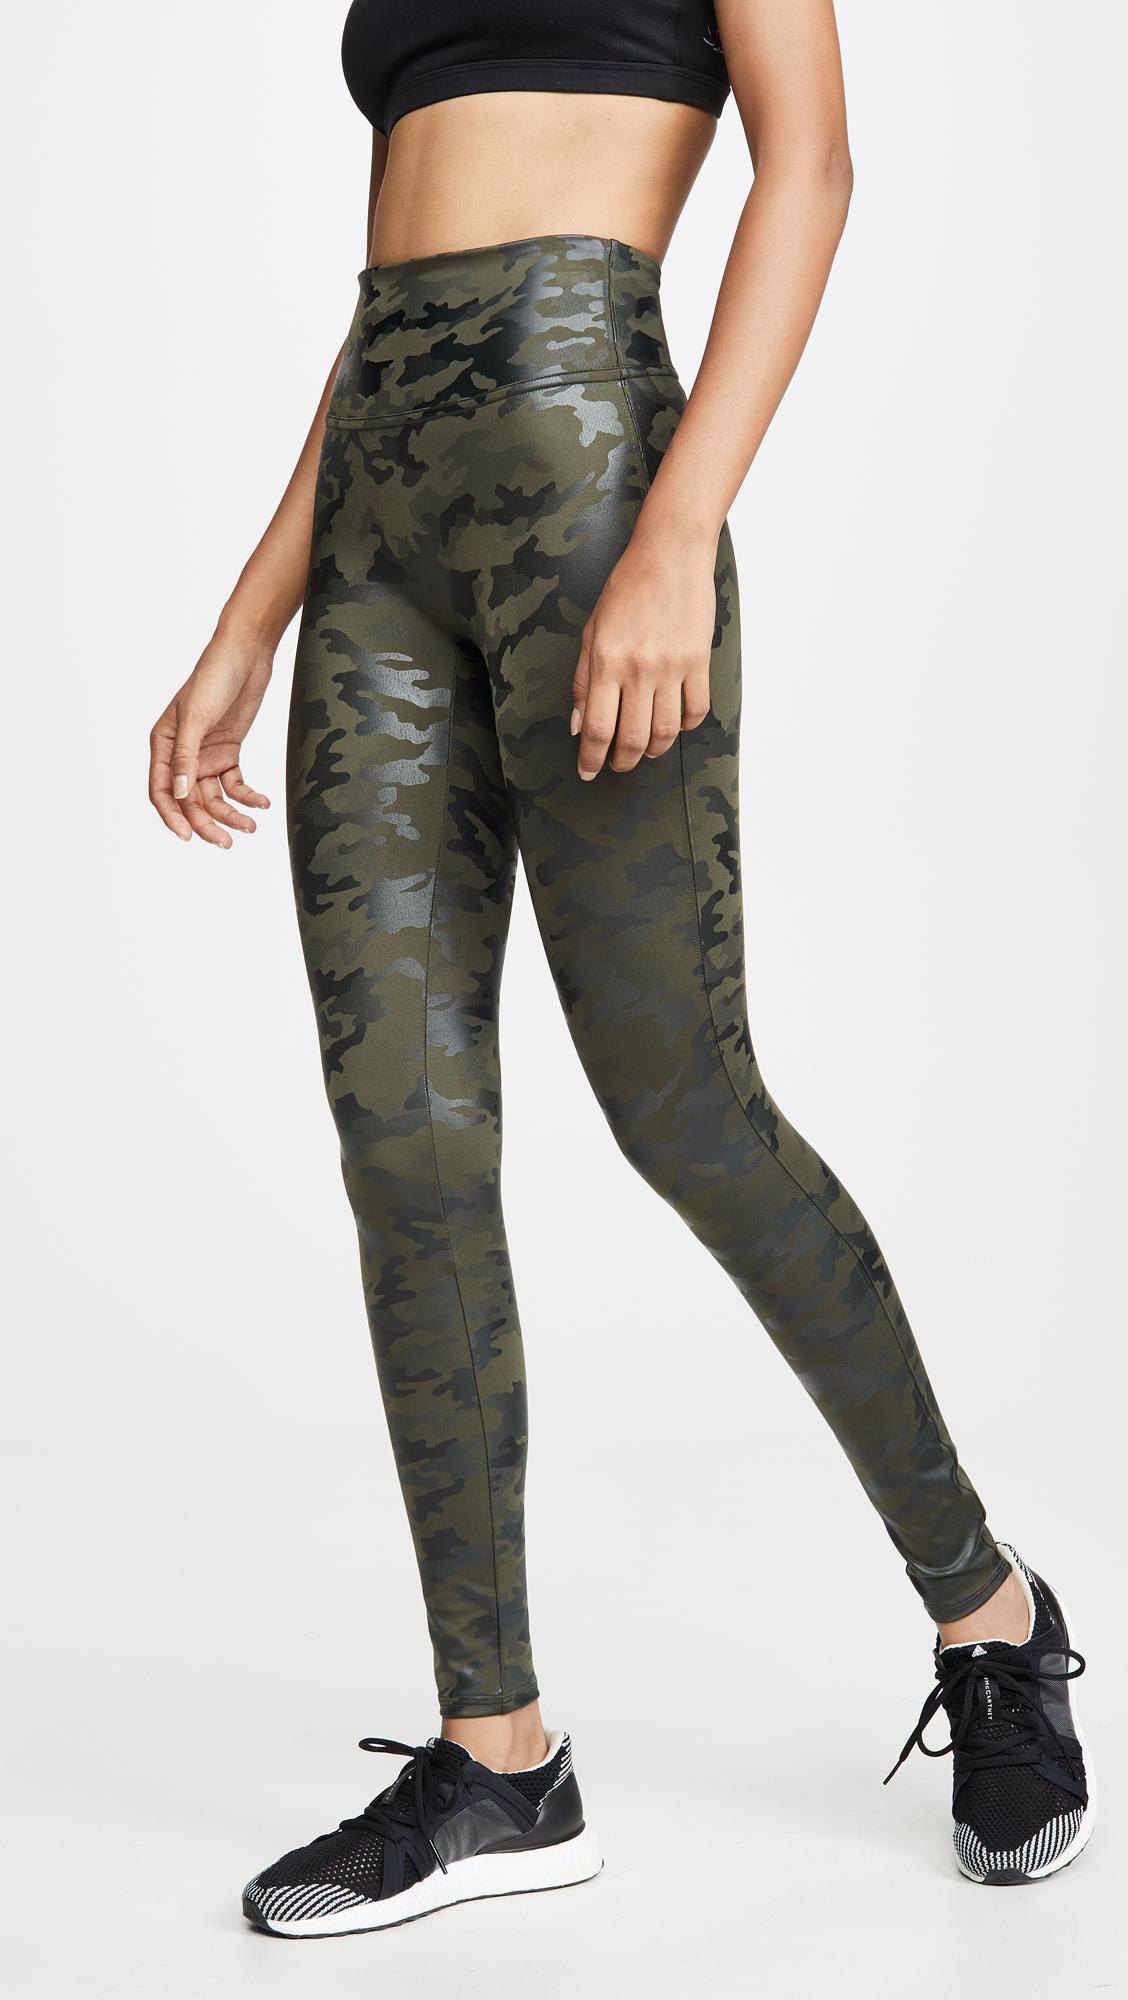 Spanx Faux Leather Leggings Green